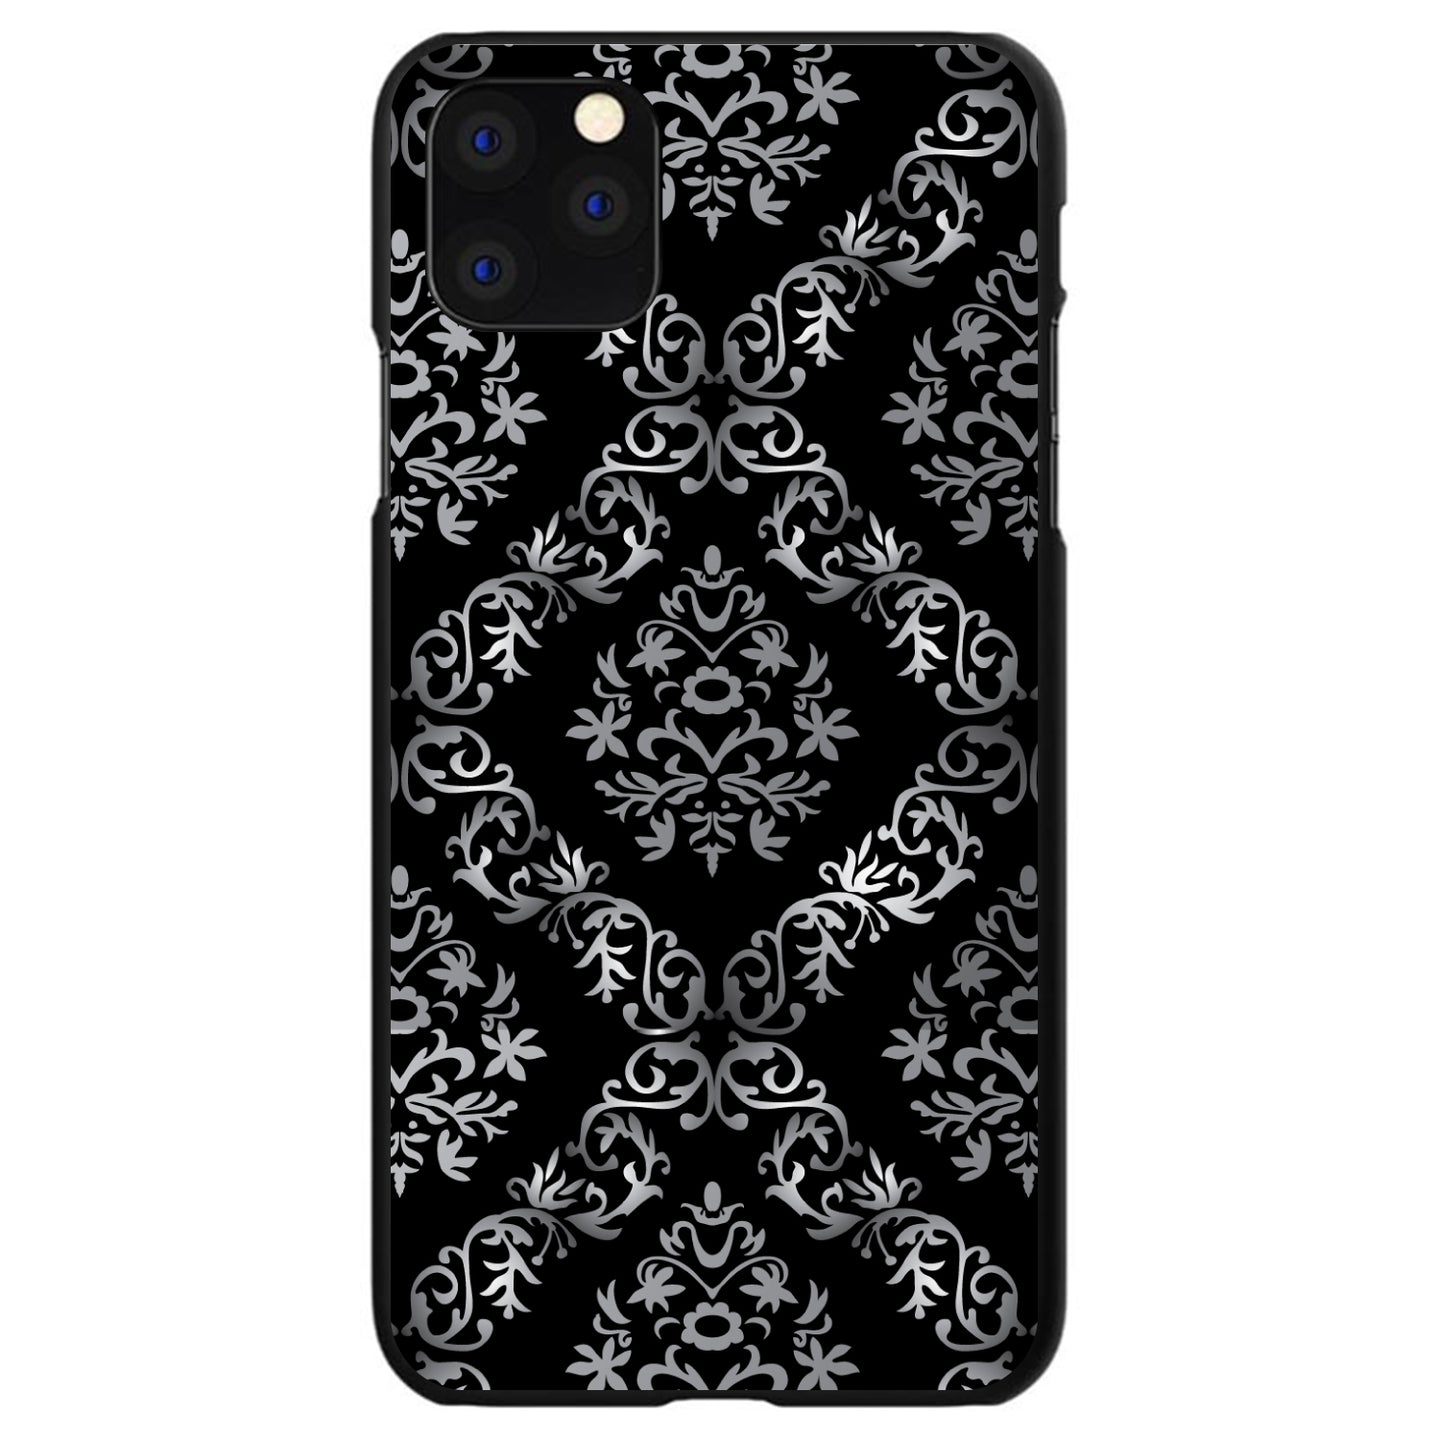 DistinctInk® Hard Plastic Snap-On Case for Apple iPhone or Samsung Galaxy - Black White Silver Grey Damask